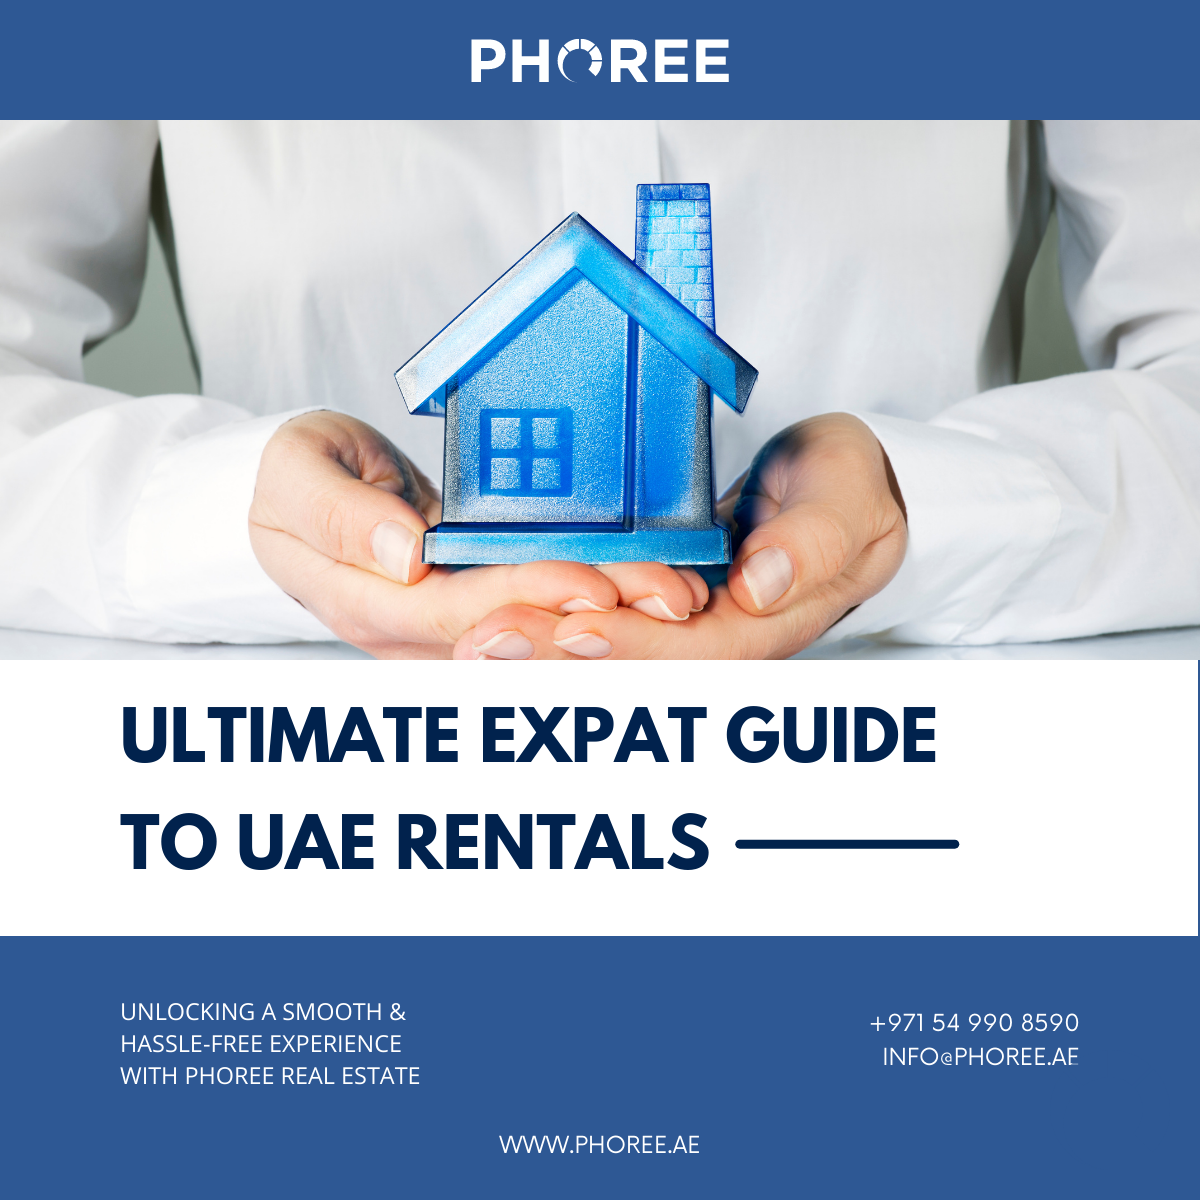 ULTIMATE EXPAT GUIDE TO UAE RENTALS